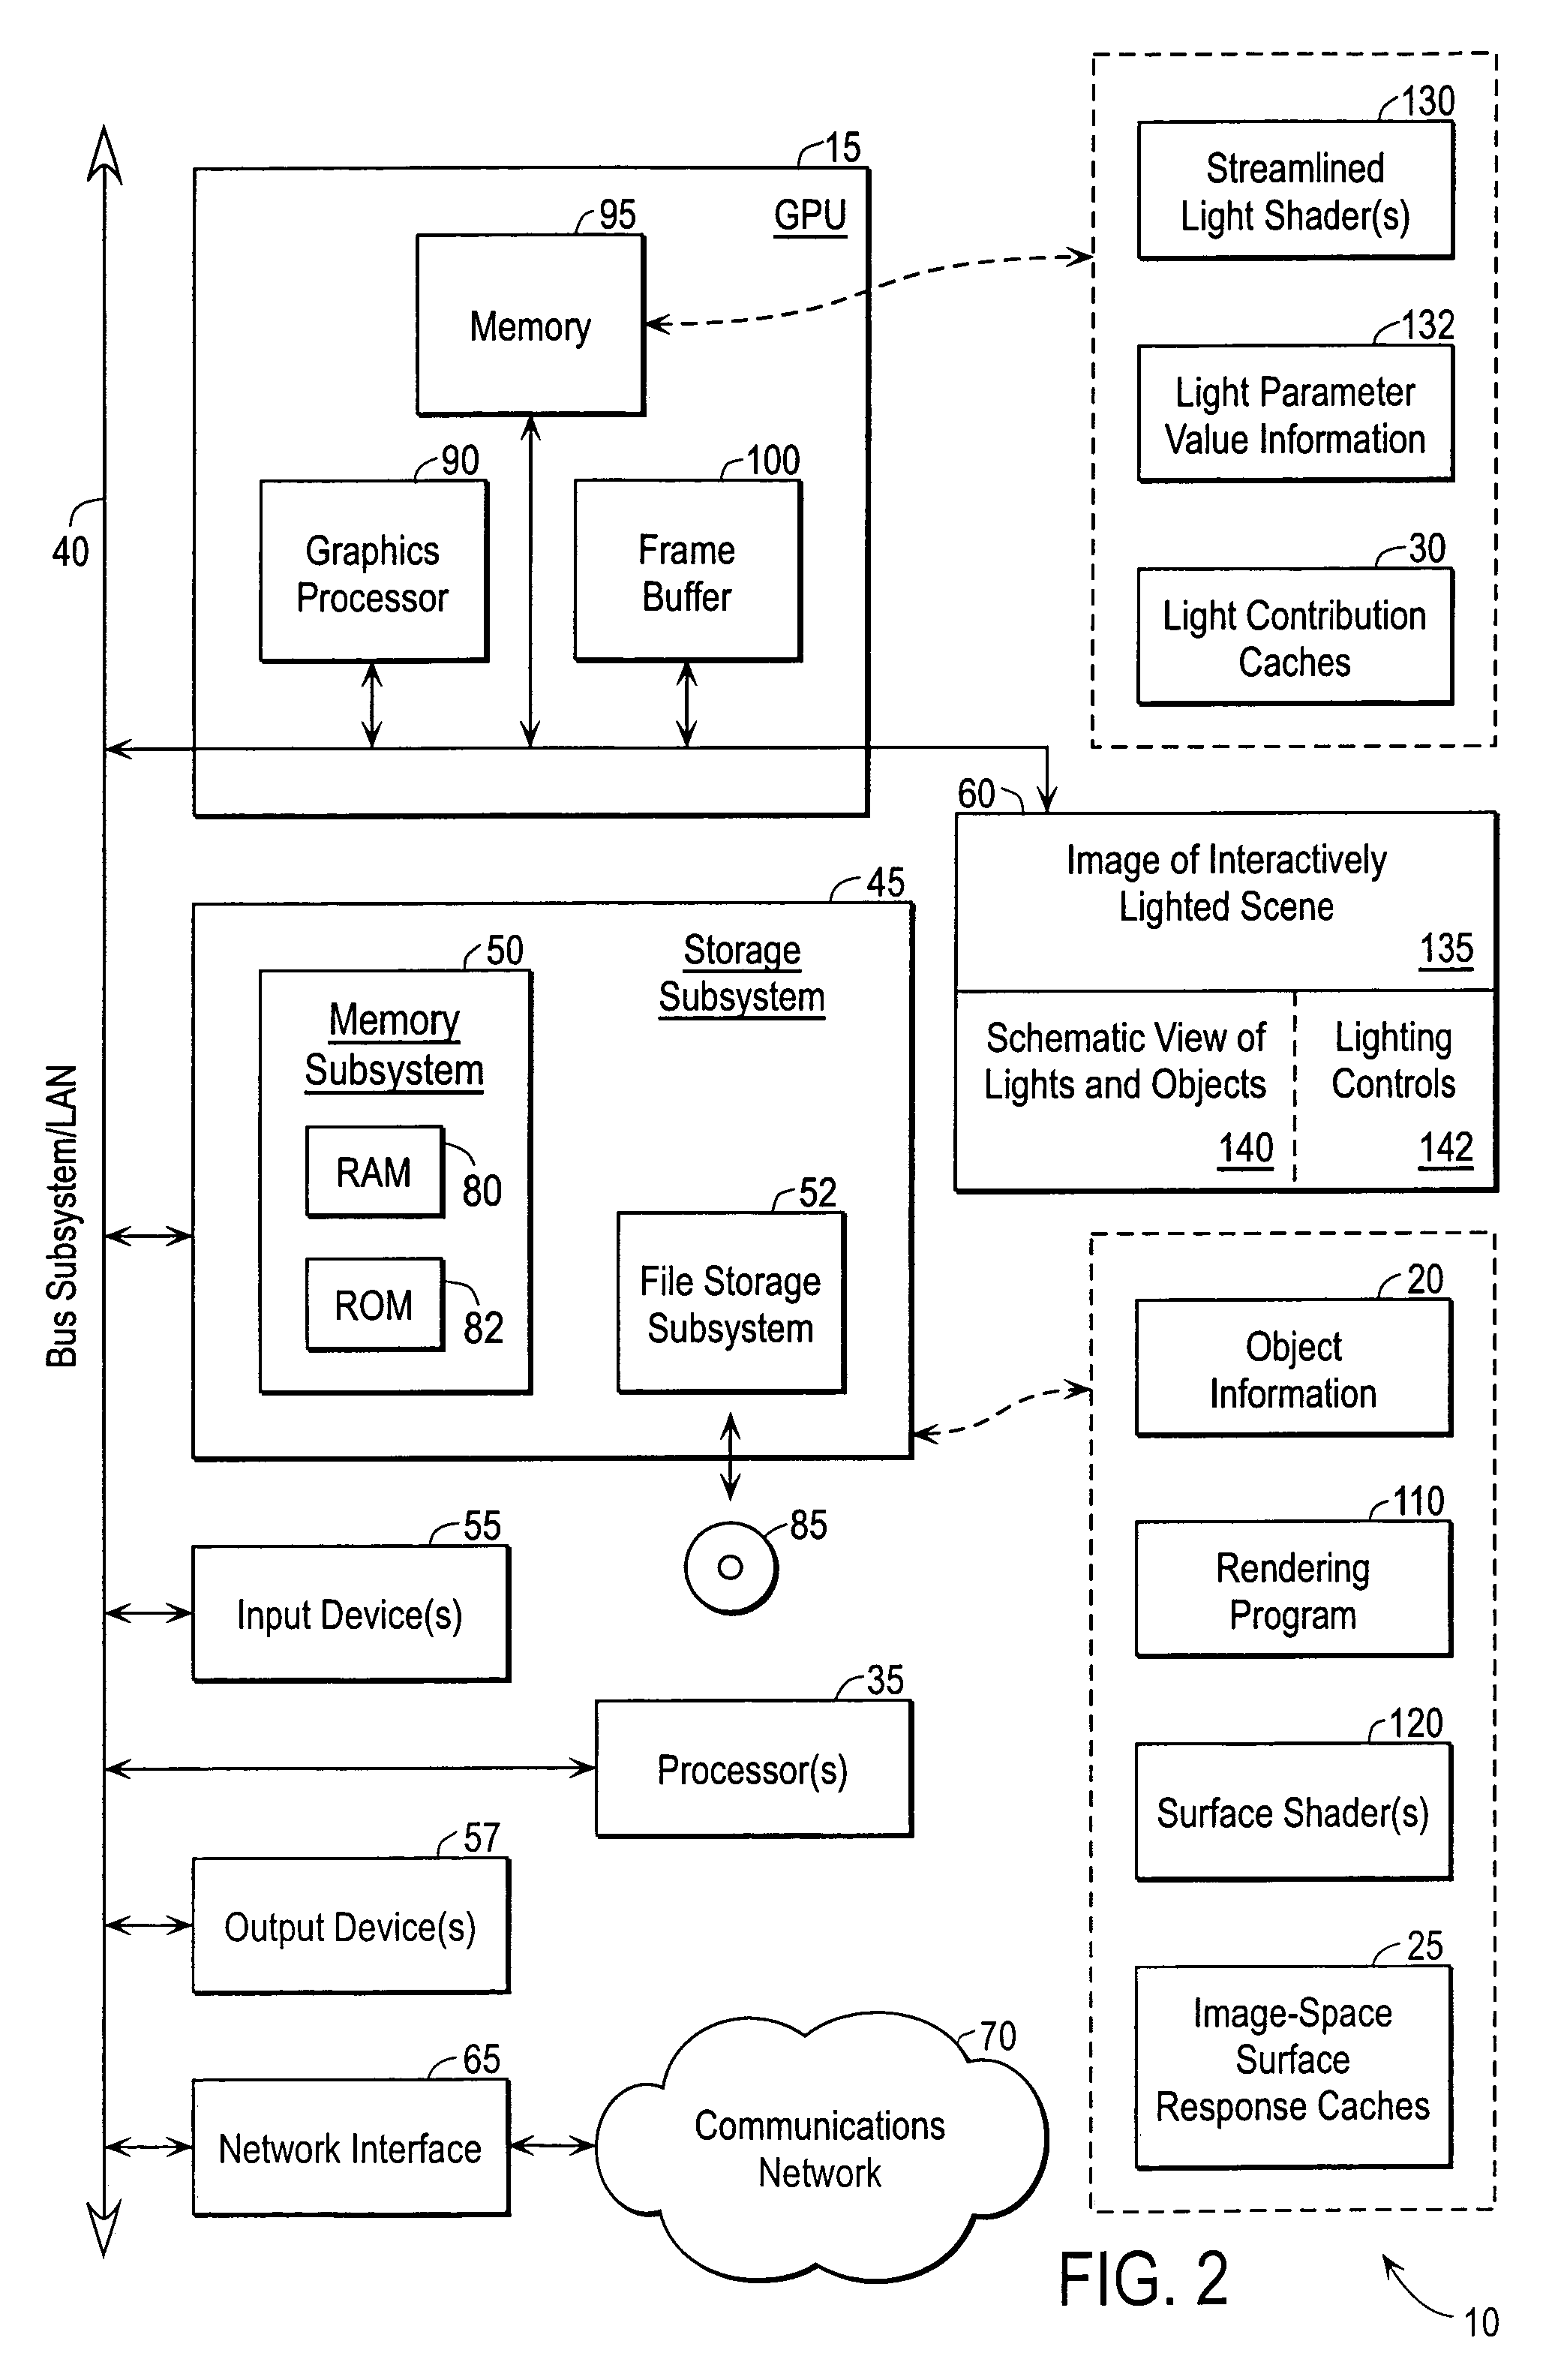 Hybrid hardware-accelerated relighting system for computer cinematography